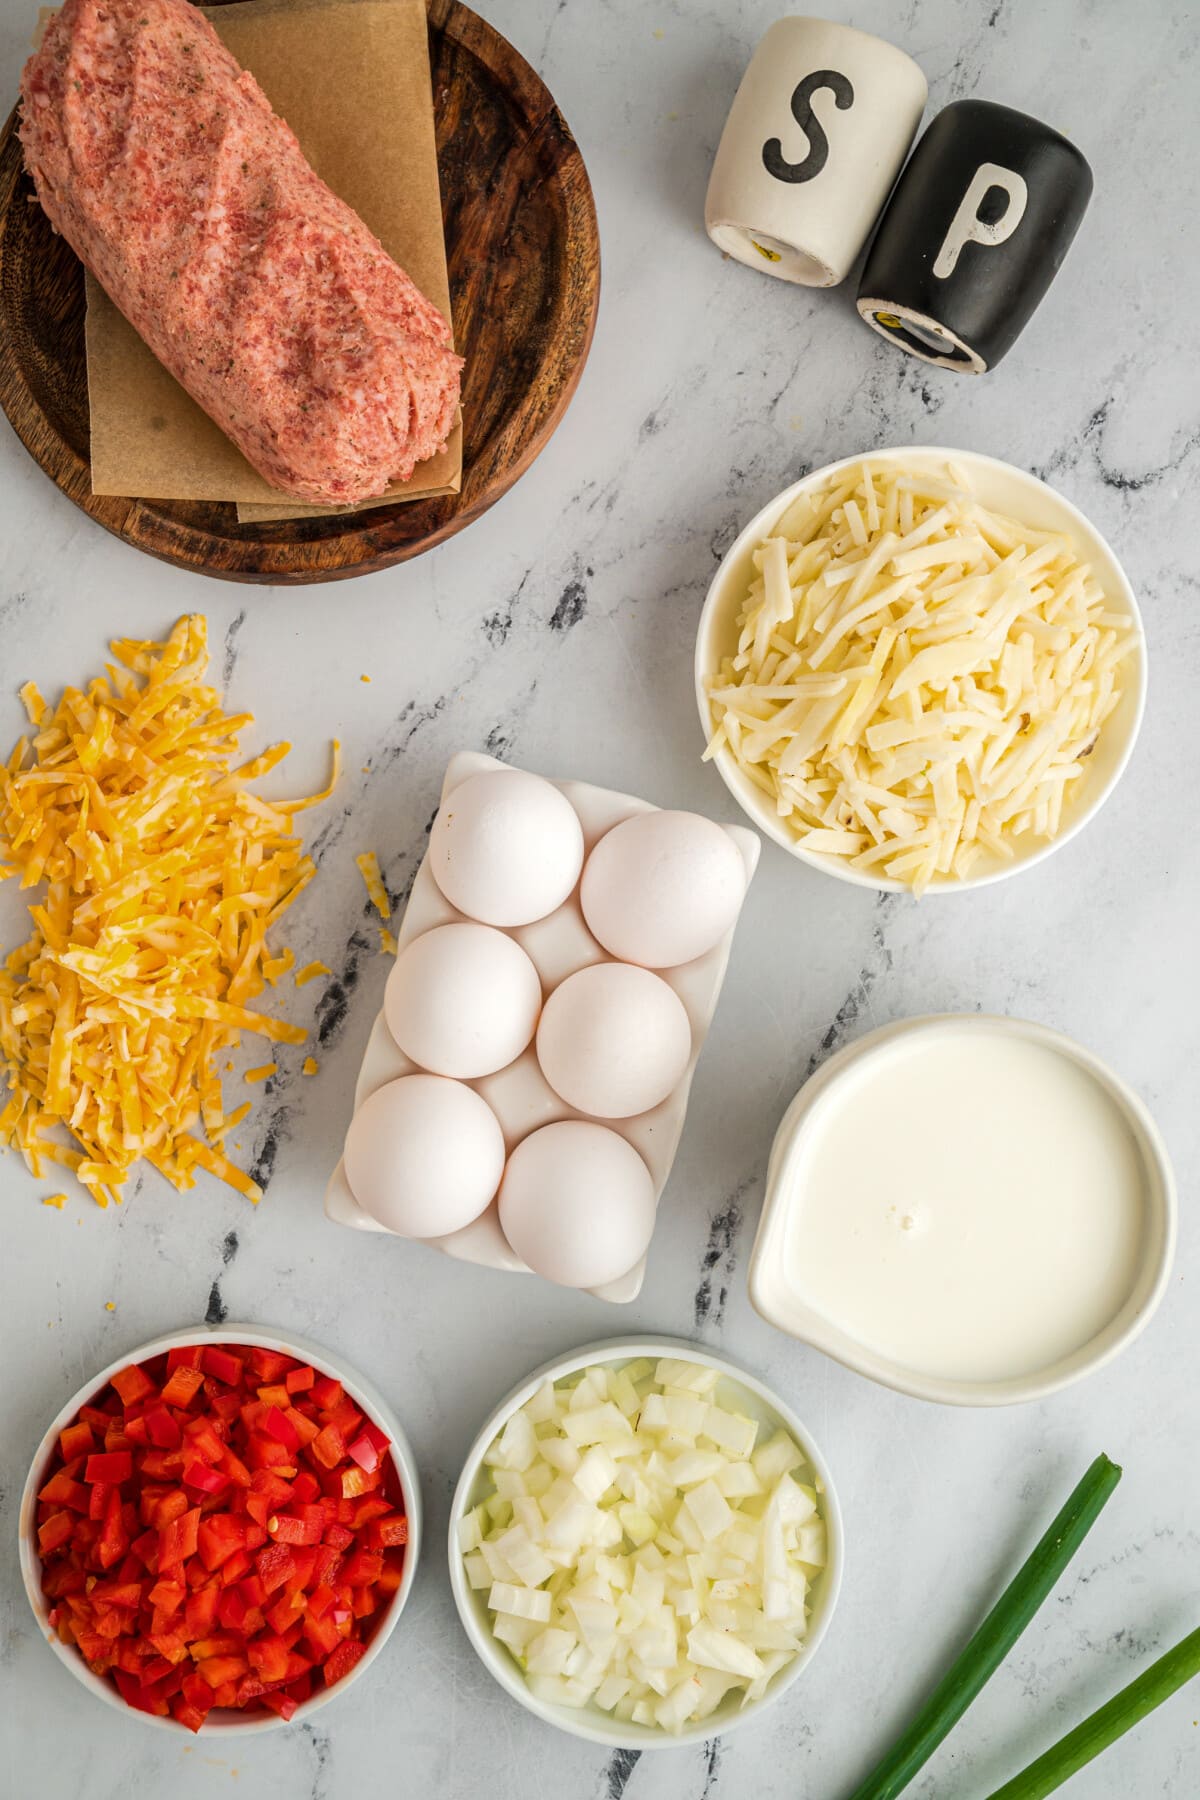 ingredients you will need to make a breakfast casserole